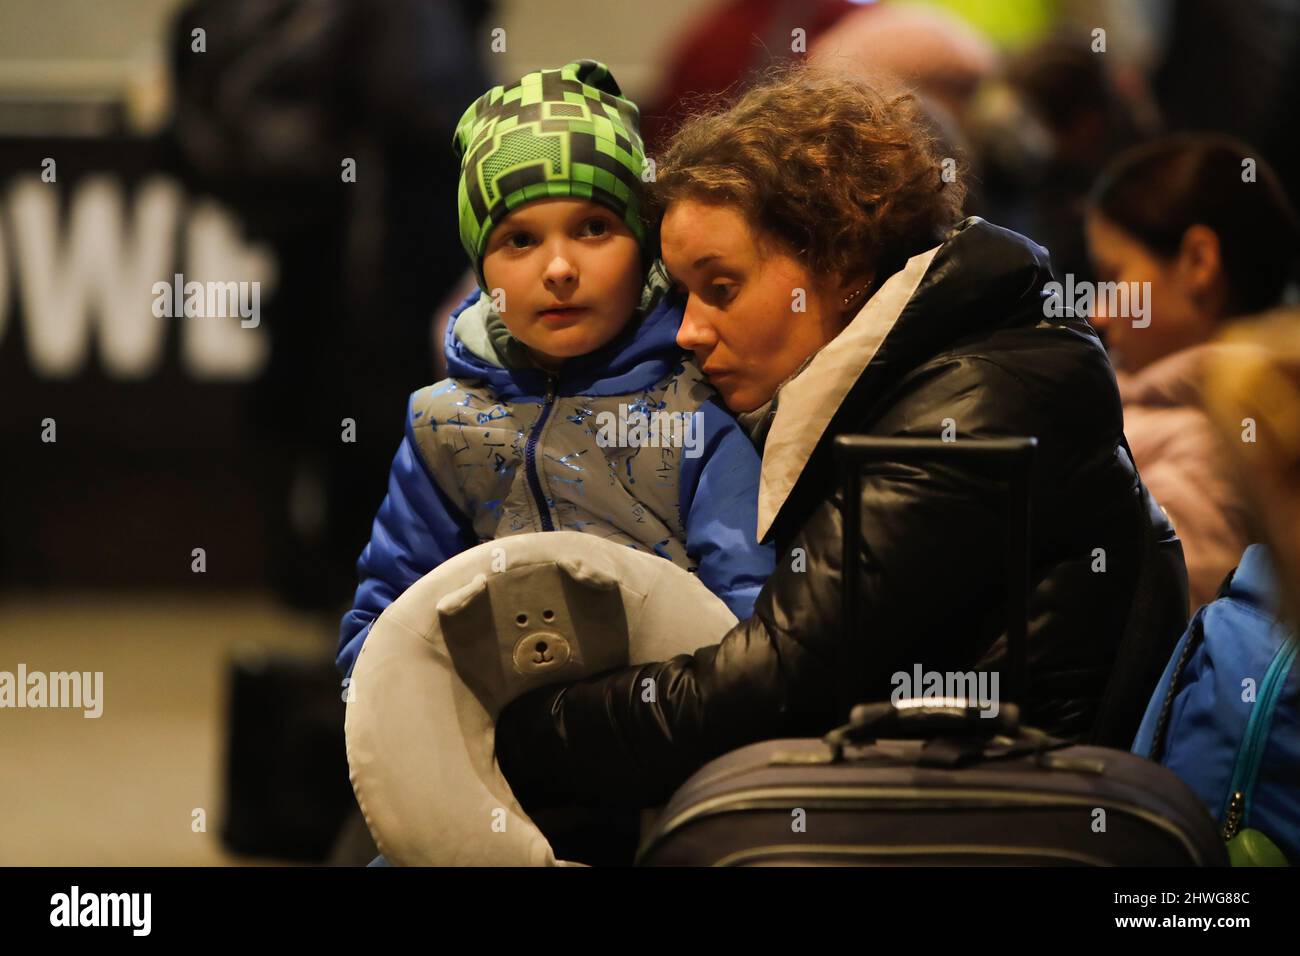 Warsaw, Poland. 5th Mar, 2022. At zero degree Celsius, a Ukrainian mother takes her son into her arms to keep him warm, inside a Warsaw refugee center, as floods of refugees escape from Ukraine to Poland, following the Russian invasion. According to the United Nations, the war has been posing threats to Childrens mental health and personal safety, with nearly 7 deaths of kids reported so far. (Credit Image: © Daniel Ceng Shou-Yi/ZUMA Press Wire) Stock Photo